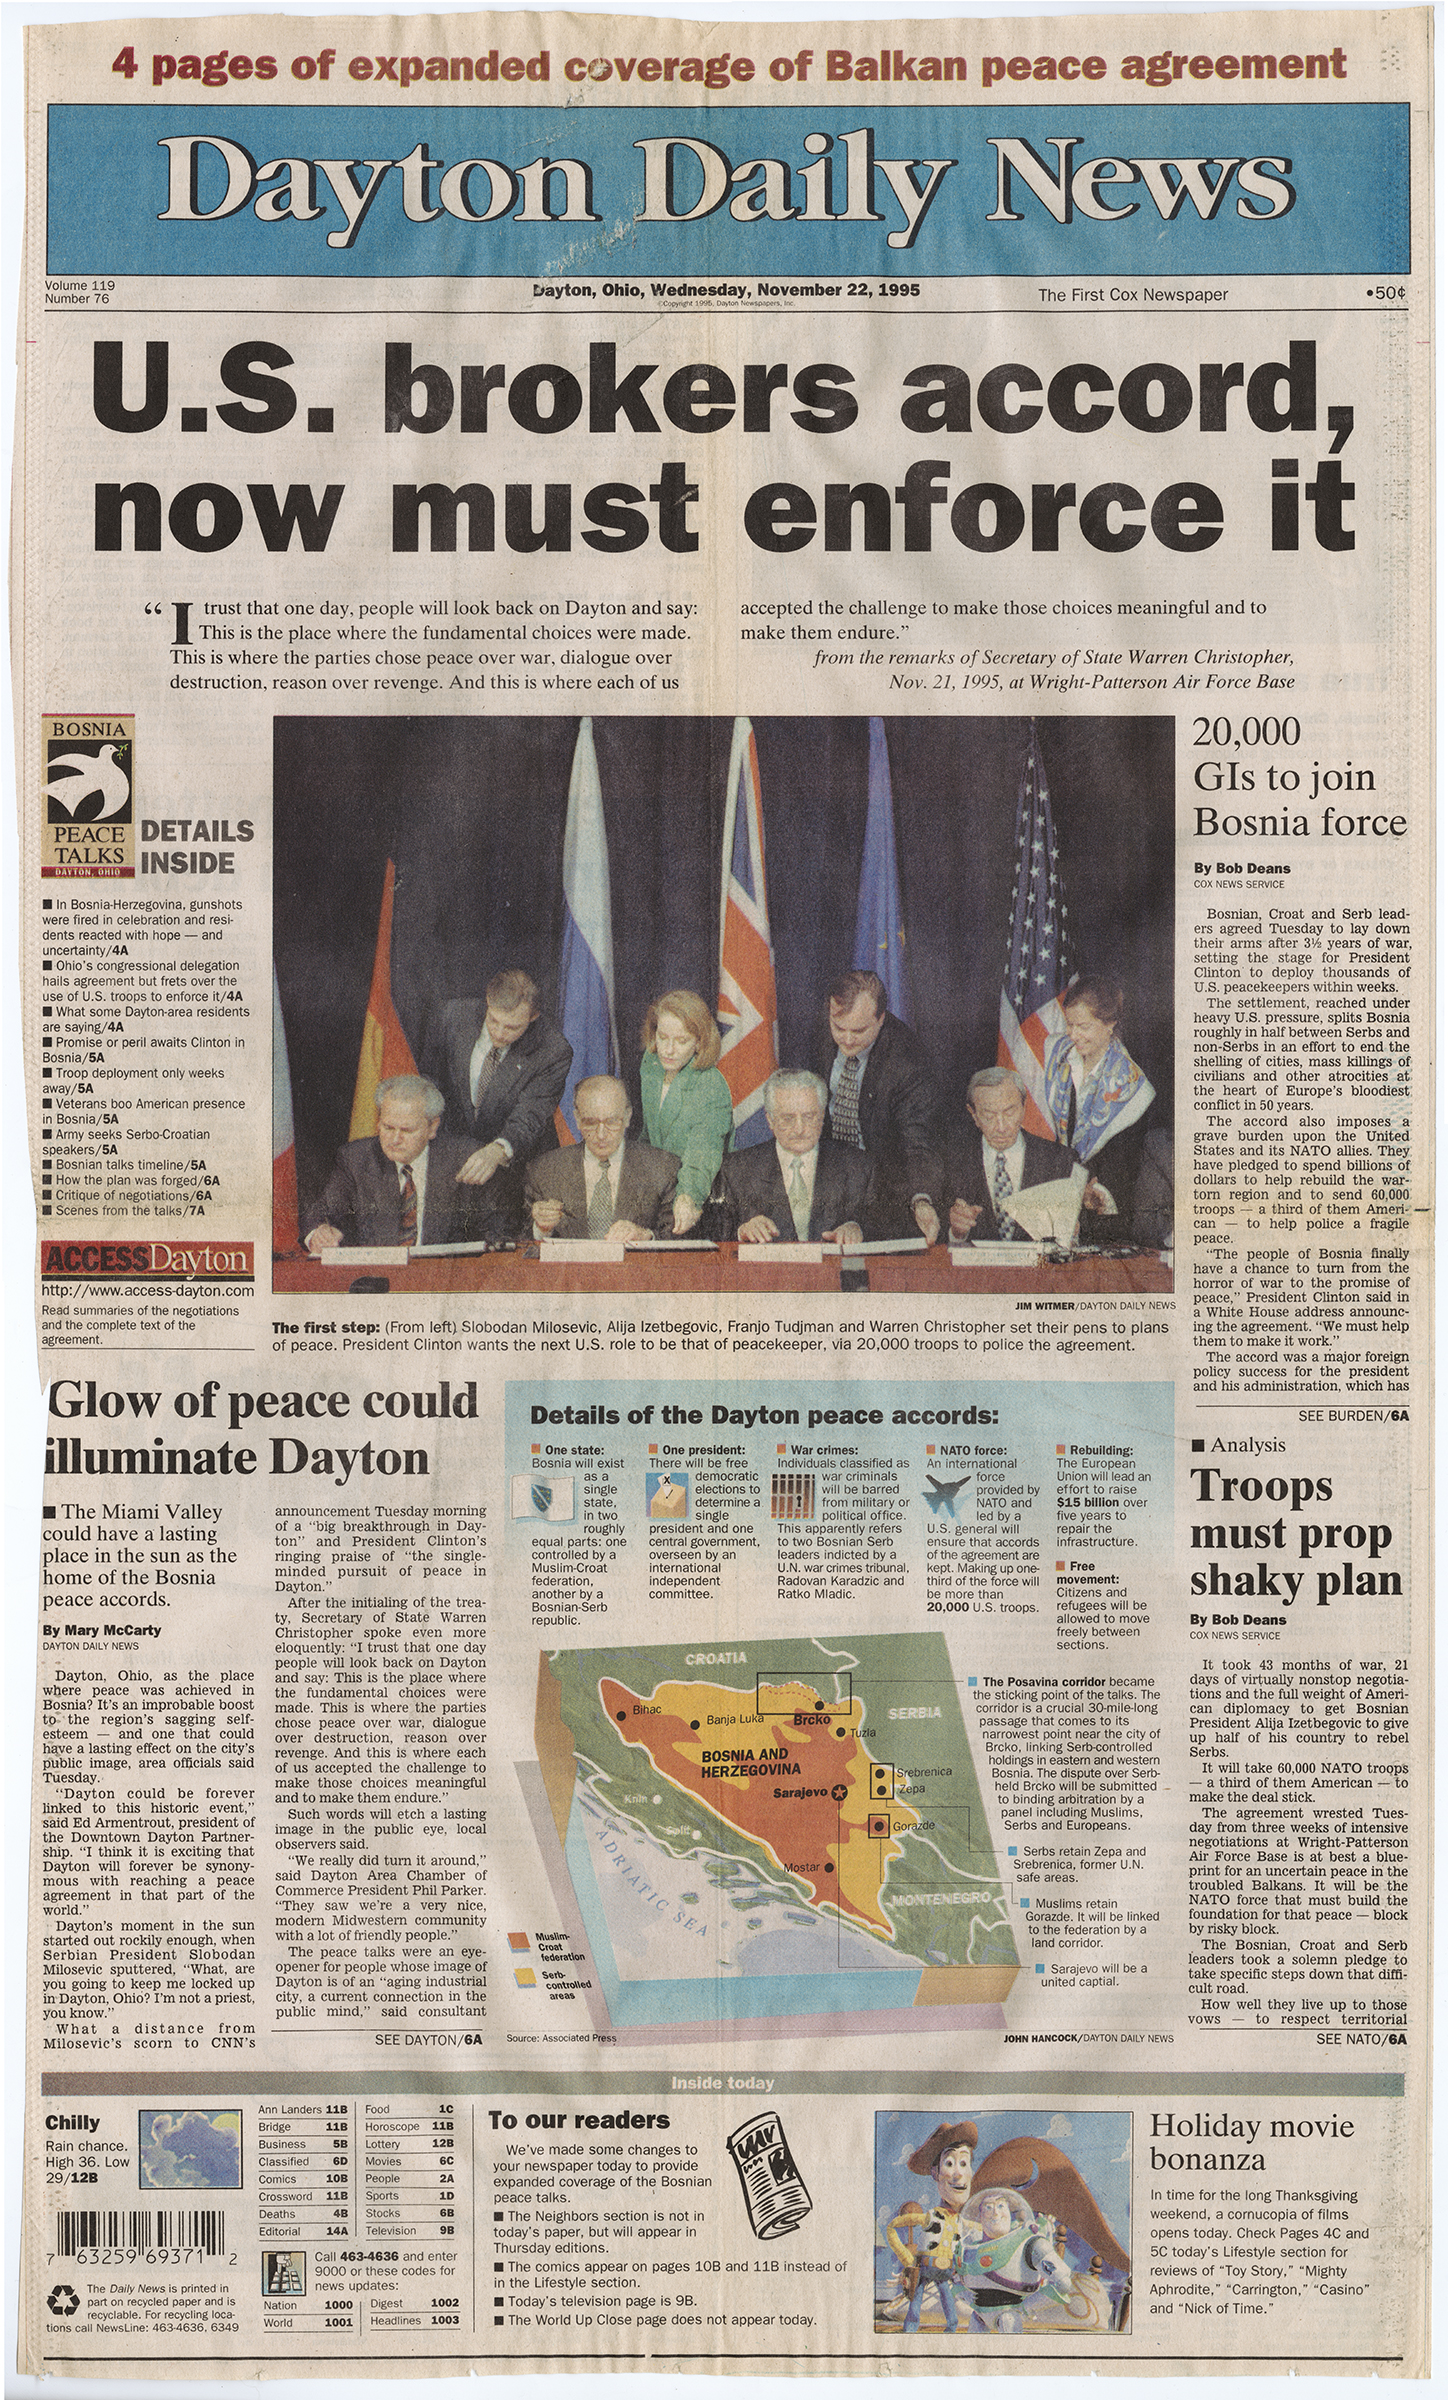 "U.S. Brokers Accord, Now Must Enforce It," Dayton Daily News, November 21, 1995, page 11, from MS-411